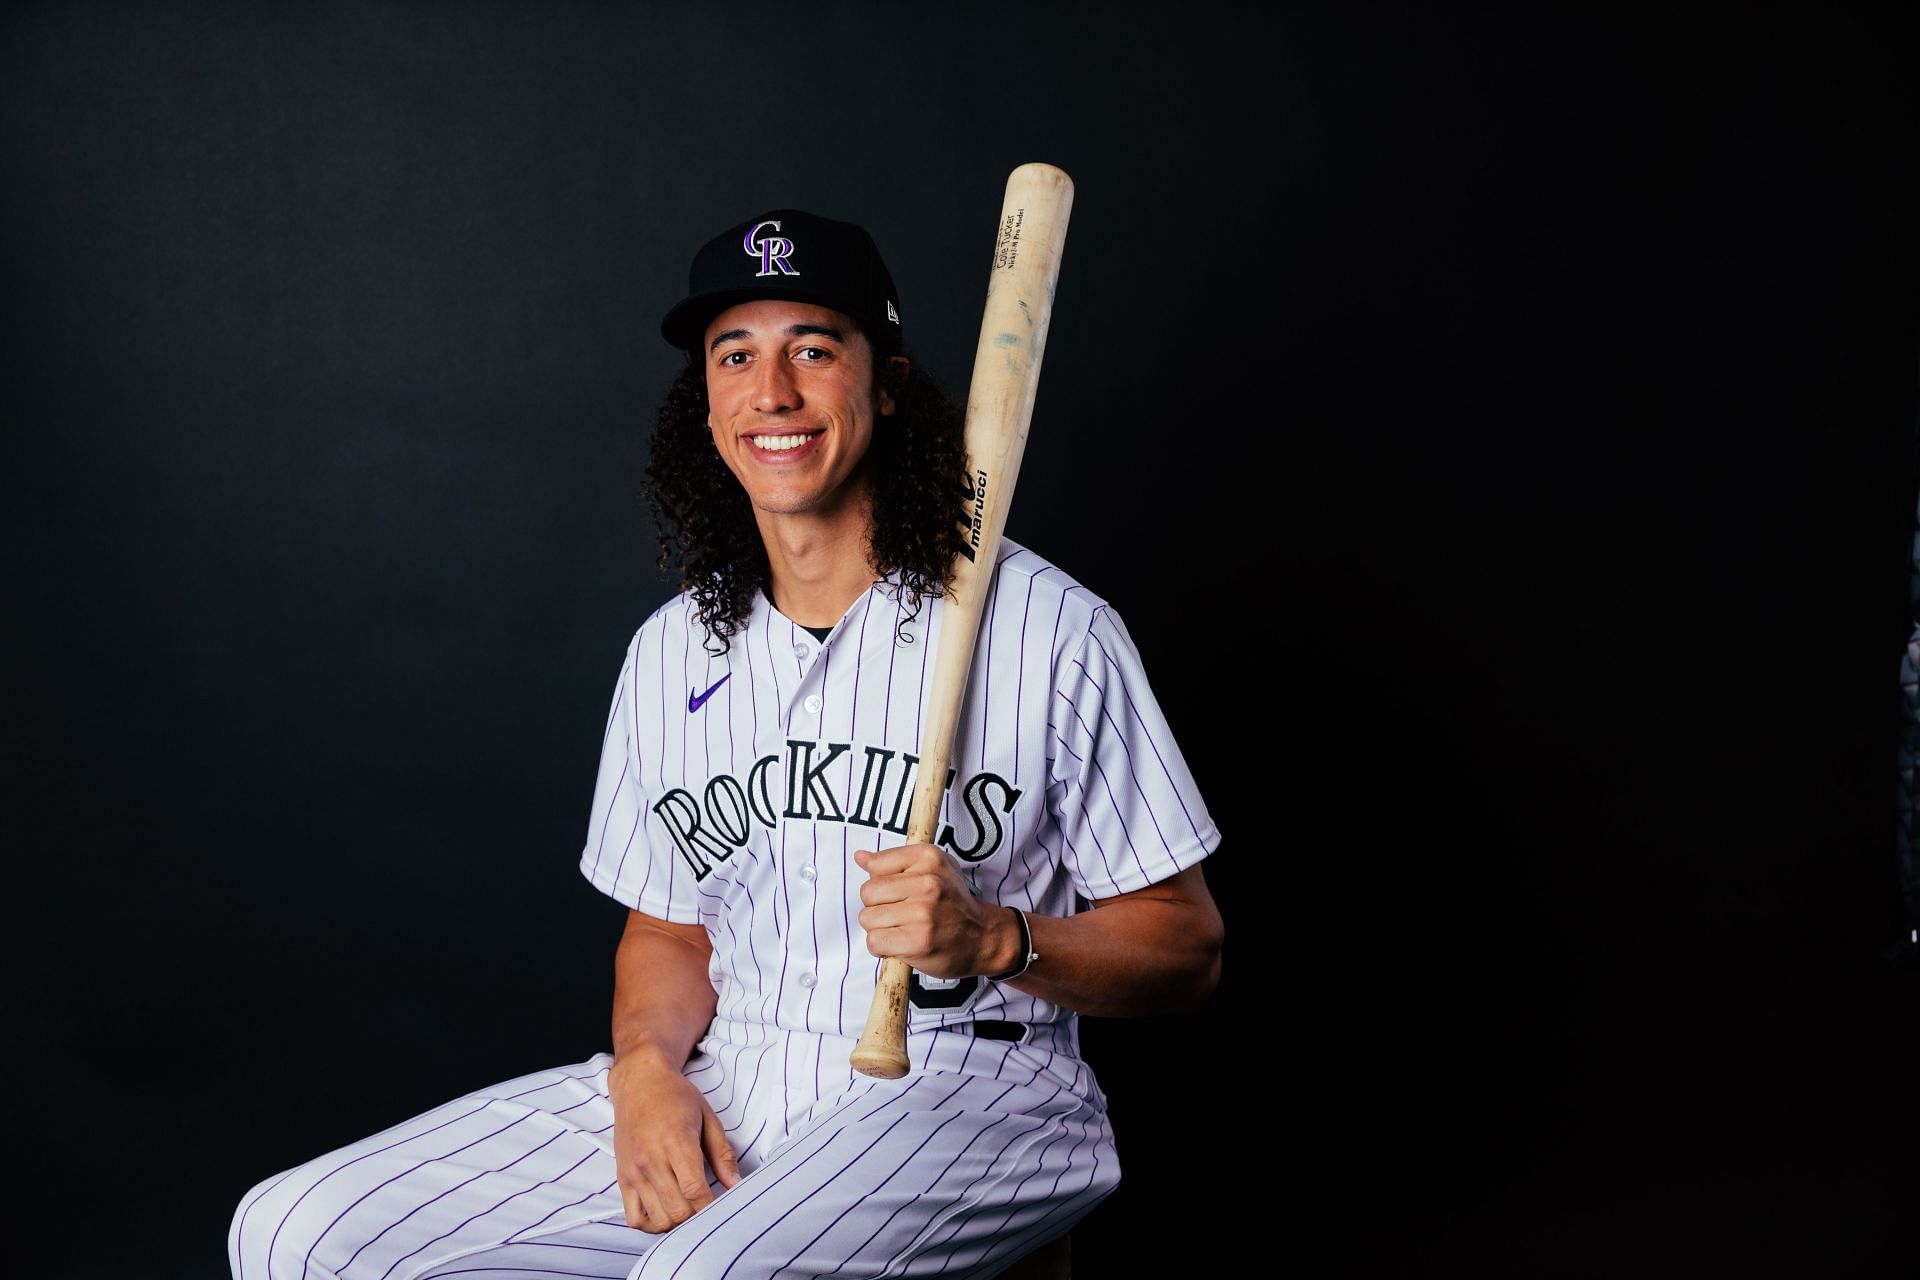 Colorado Rockies Photo Day: SCOTTSDALE, ARIZONA - FEBRUARY 24: Cole Tucker #3 of the Colorado Rockies poses for a photo during media day at Salt River Fields at Talking Stick on February 24, 2023 in Scottsdale, Arizona. (Photo by Carmen Mandato/Getty Images)